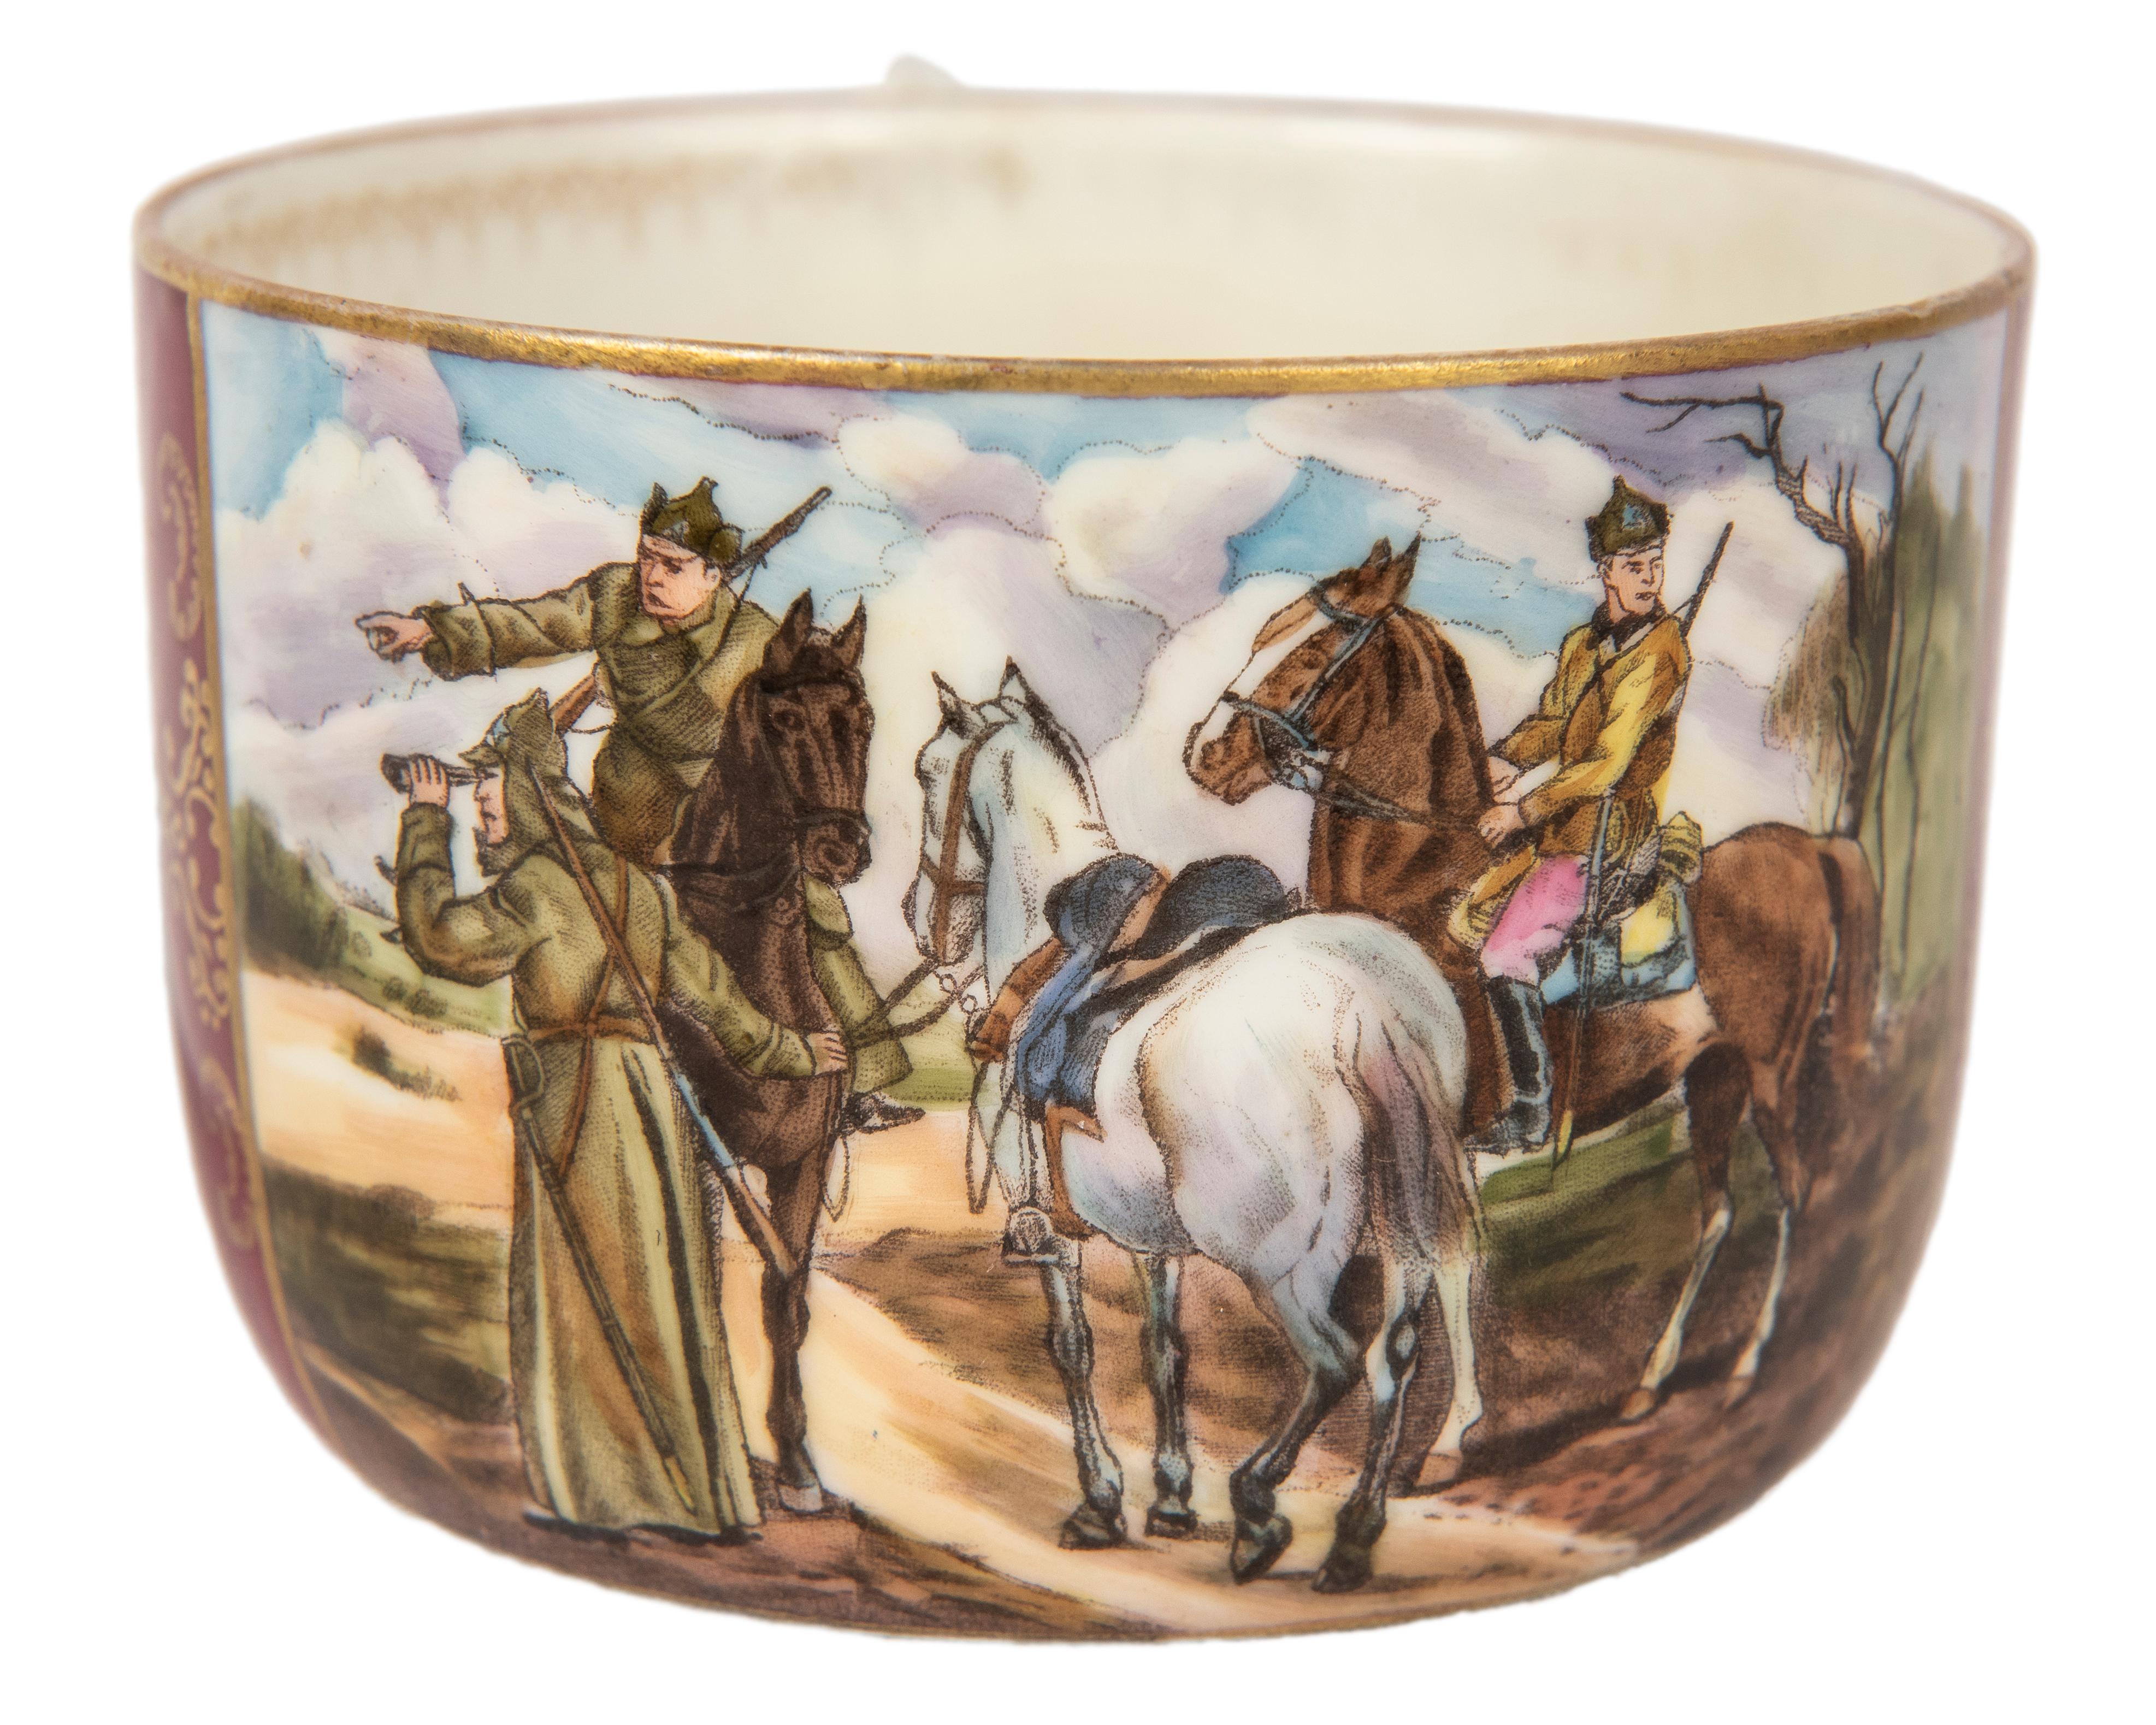 Painted between 1935 and 1946 by the Dimitrov Factory near Moscow, the rare porcelain cup and saucer commemorates the Russian Civil War of 1918-21. Of high quality with crisp detail and vivid color, the front of cup depicts a detailed scene of Red